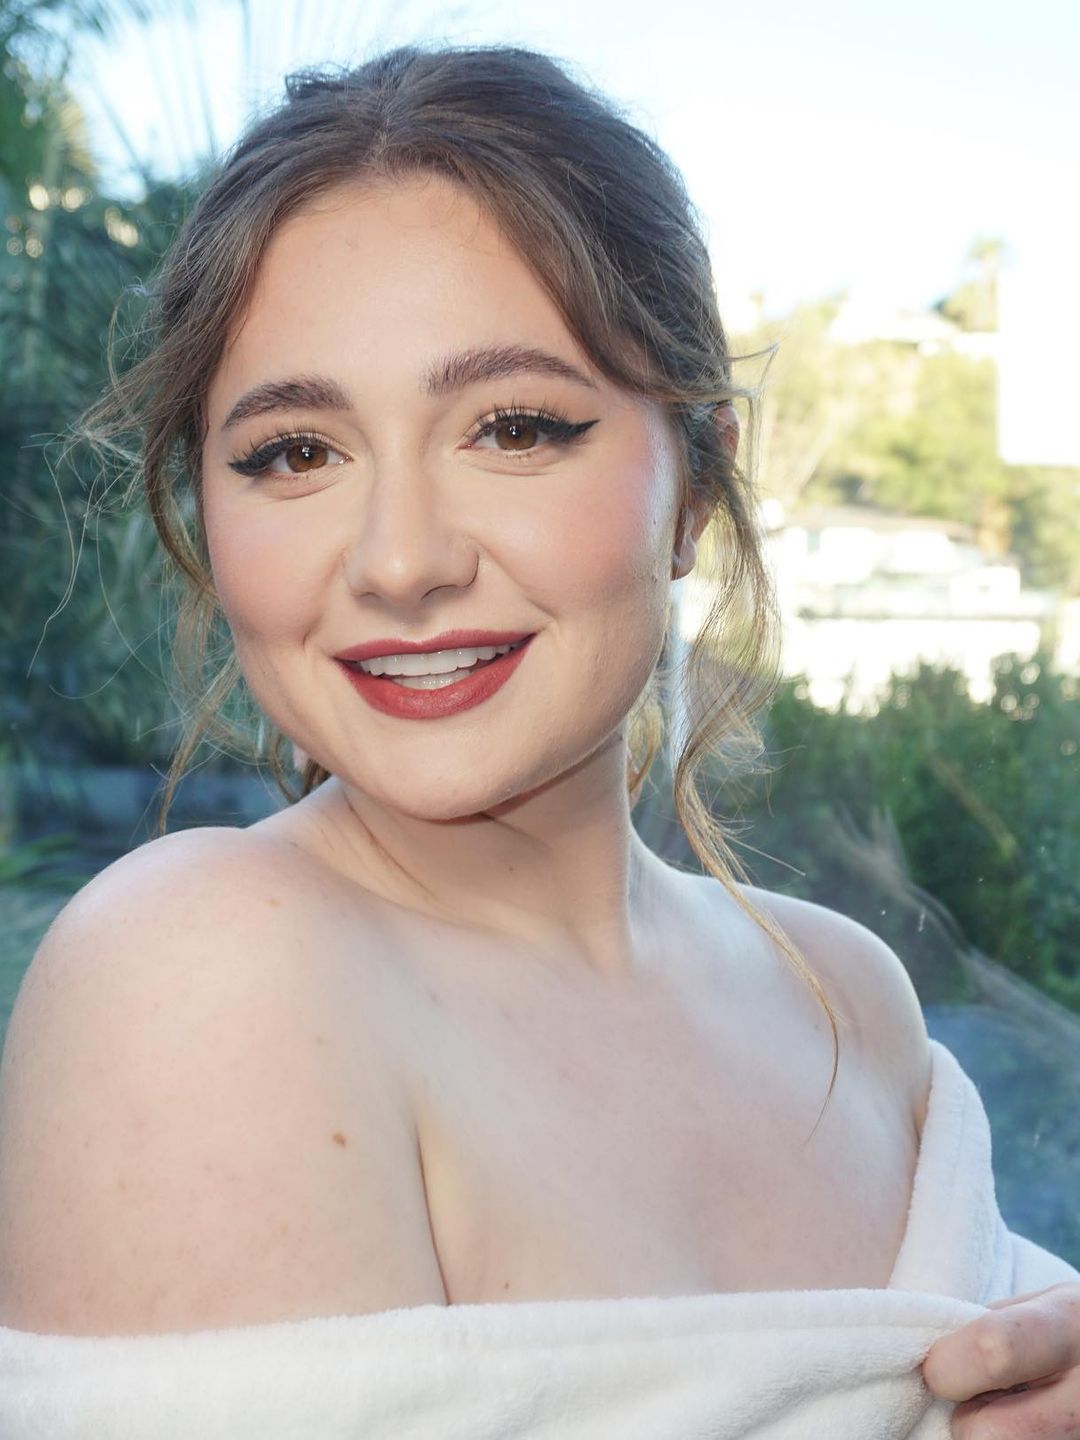 Emma Kenney who are her parents